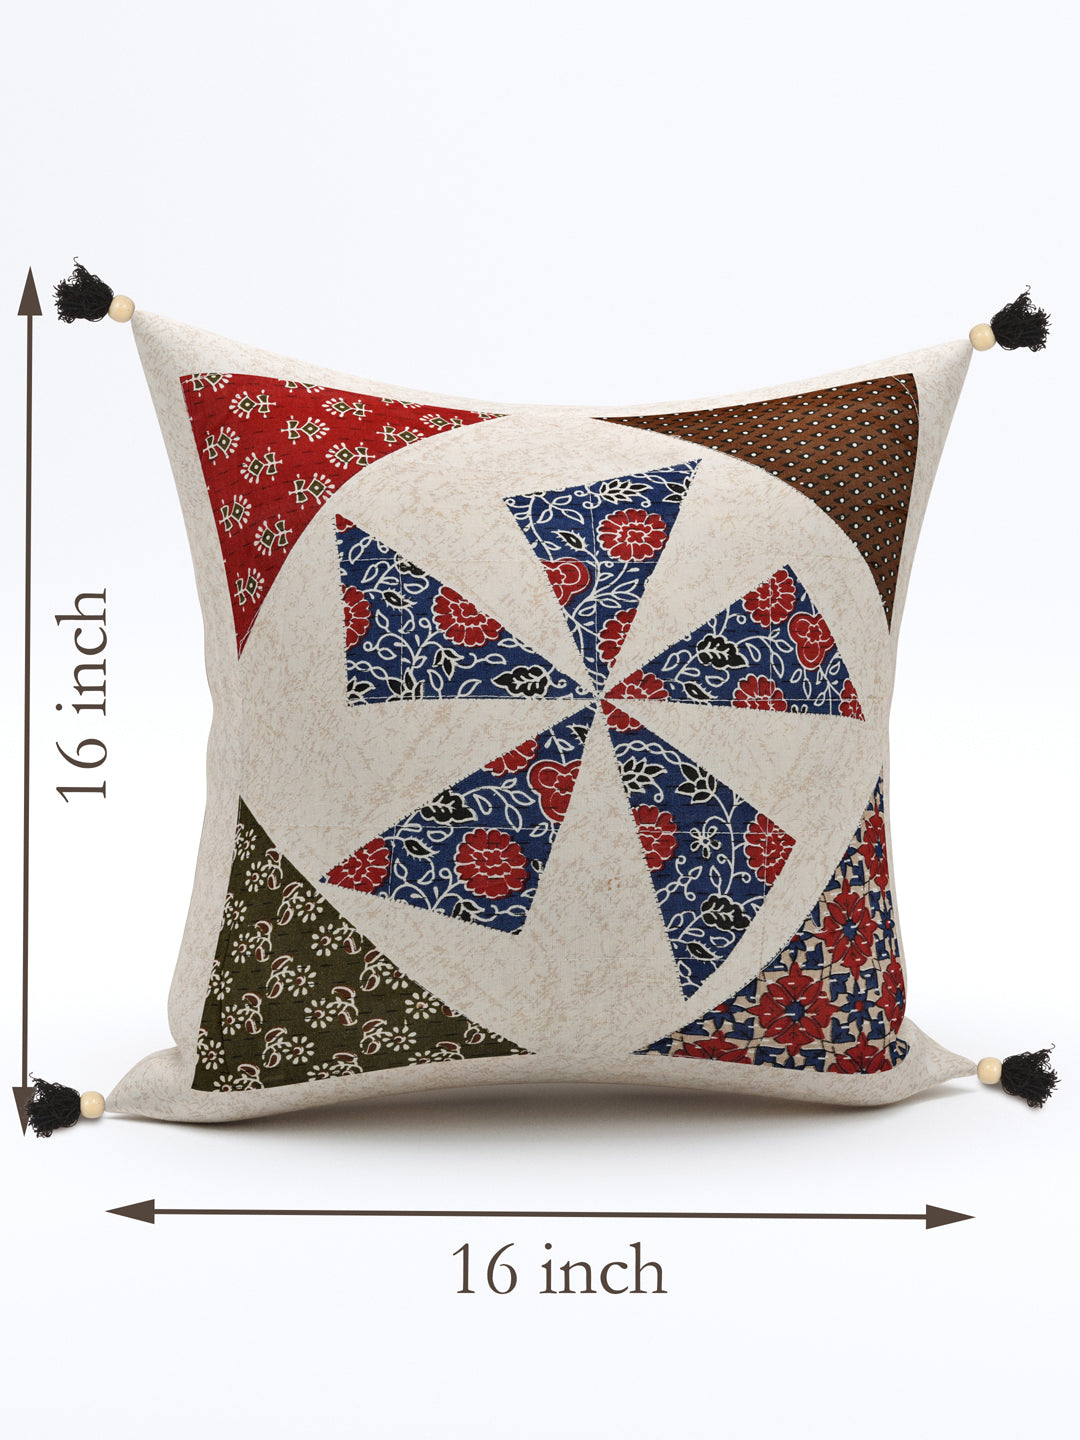 Living Roots Patchwork Cotton Cushion Cover- Set of 5 (40-027-A)